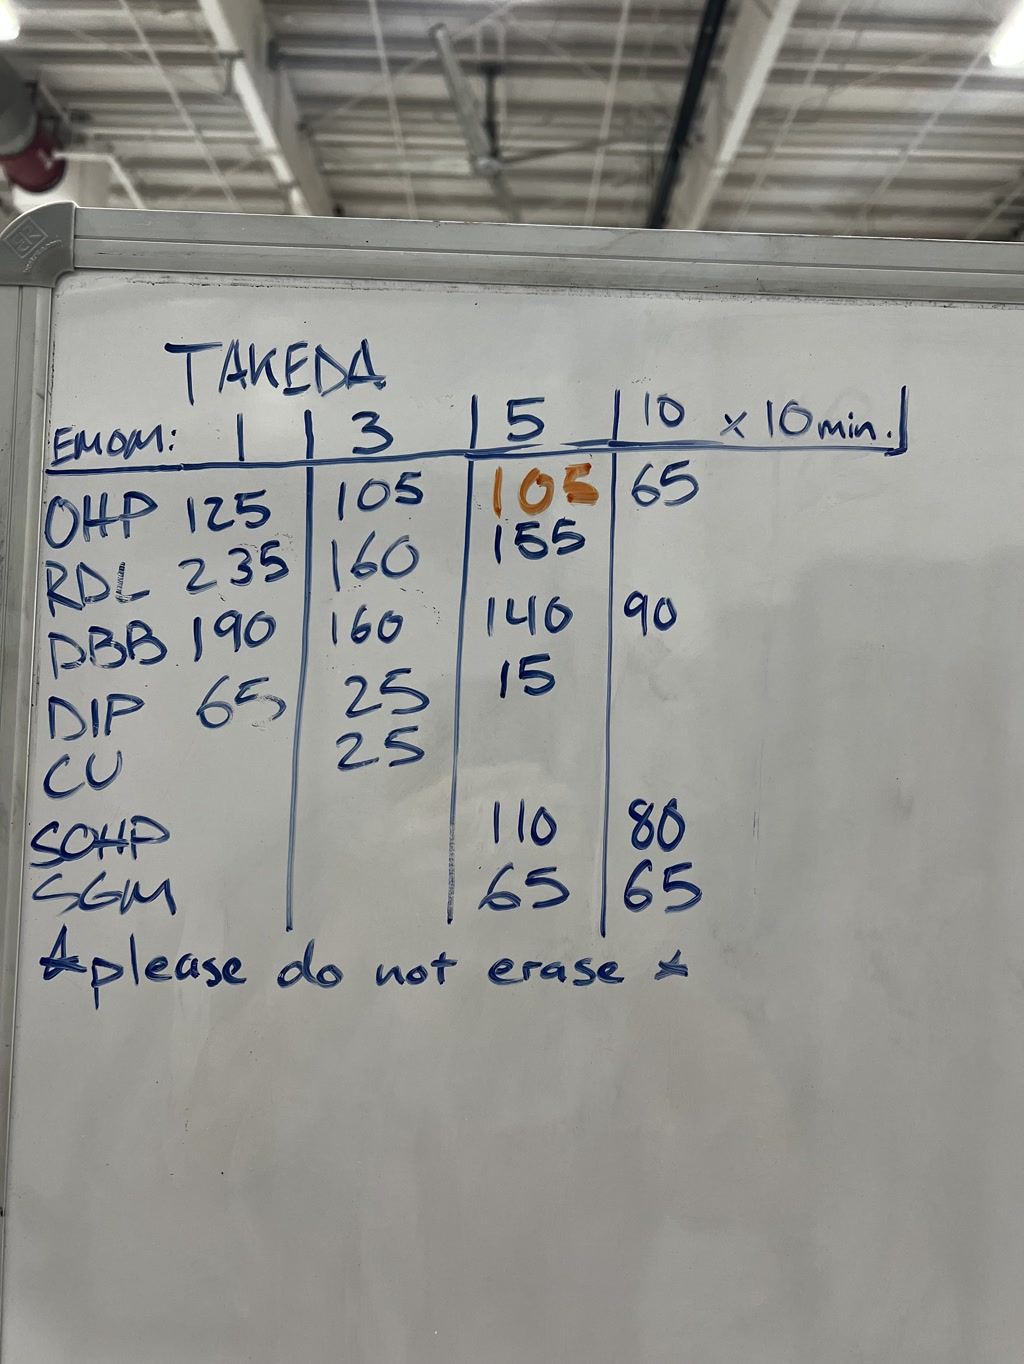 A whiteboard with handwritten notations, exercises, and numbers, presumably outlining a workout plan for someone named 'Takeda'. The board is organized into columns with progressive numbers that could be weights, repetitions, or intervals. The top of the whiteboard features the name 'Takeda' and a structure for an EMOM (Every Minute On the Minute) workout showing intervals of 1, 3, 15, and 10 repetitions for 10 minutes. Below are acronyms that likely stand for different exercises such as 'OHP' (Overhead Press), 'RDL' (Romanian Deadlift), 'DBP' (Dumbbell Press), 'DIP', 'CU' (Curls), 'SGHP' (Sumo Deadlift High Pull), followed by rows of numbers. At the bottom of the whiteboard, a written note says 'please do not erase'.